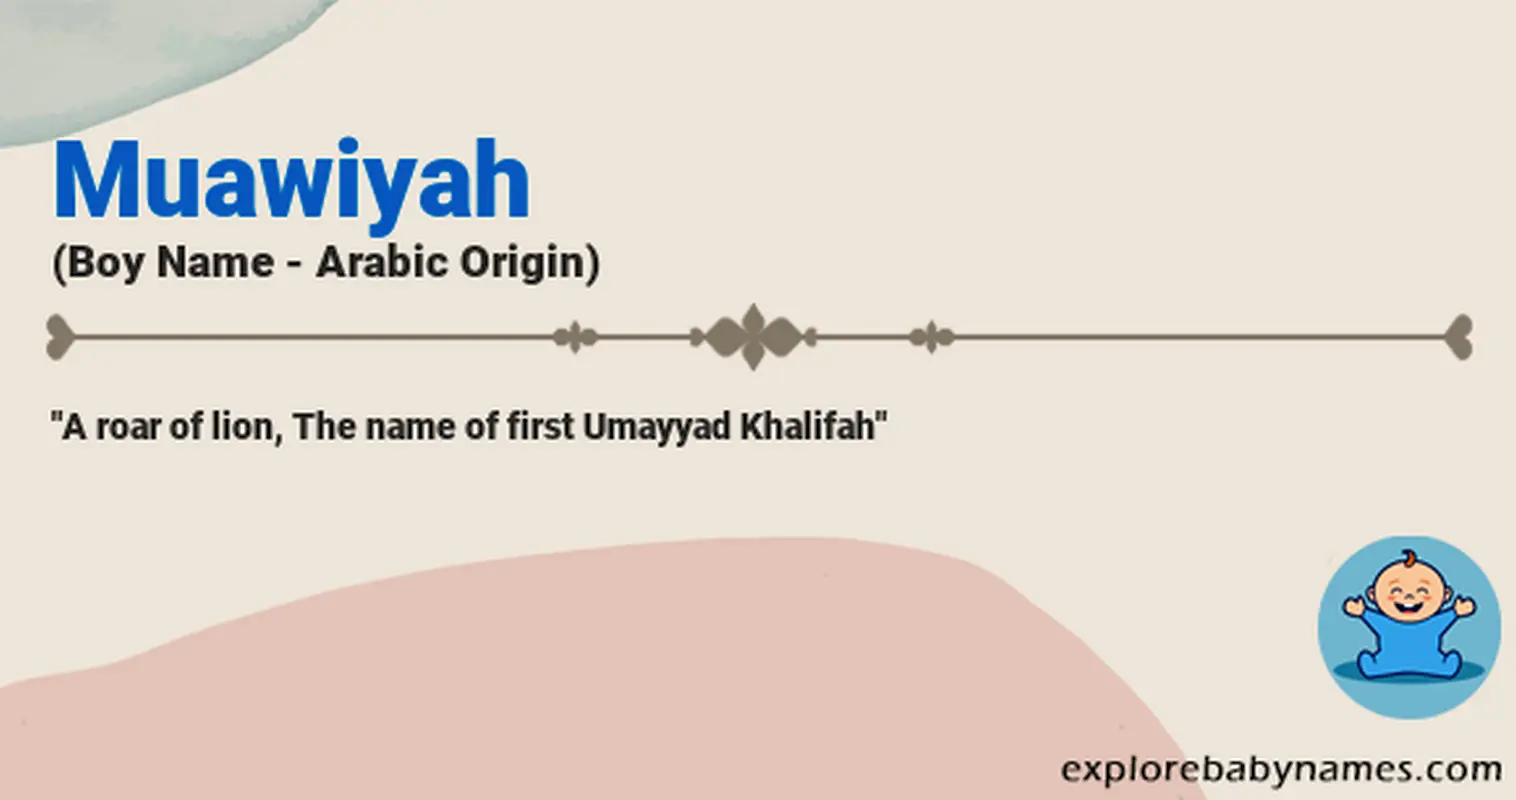 Meaning of Muawiyah